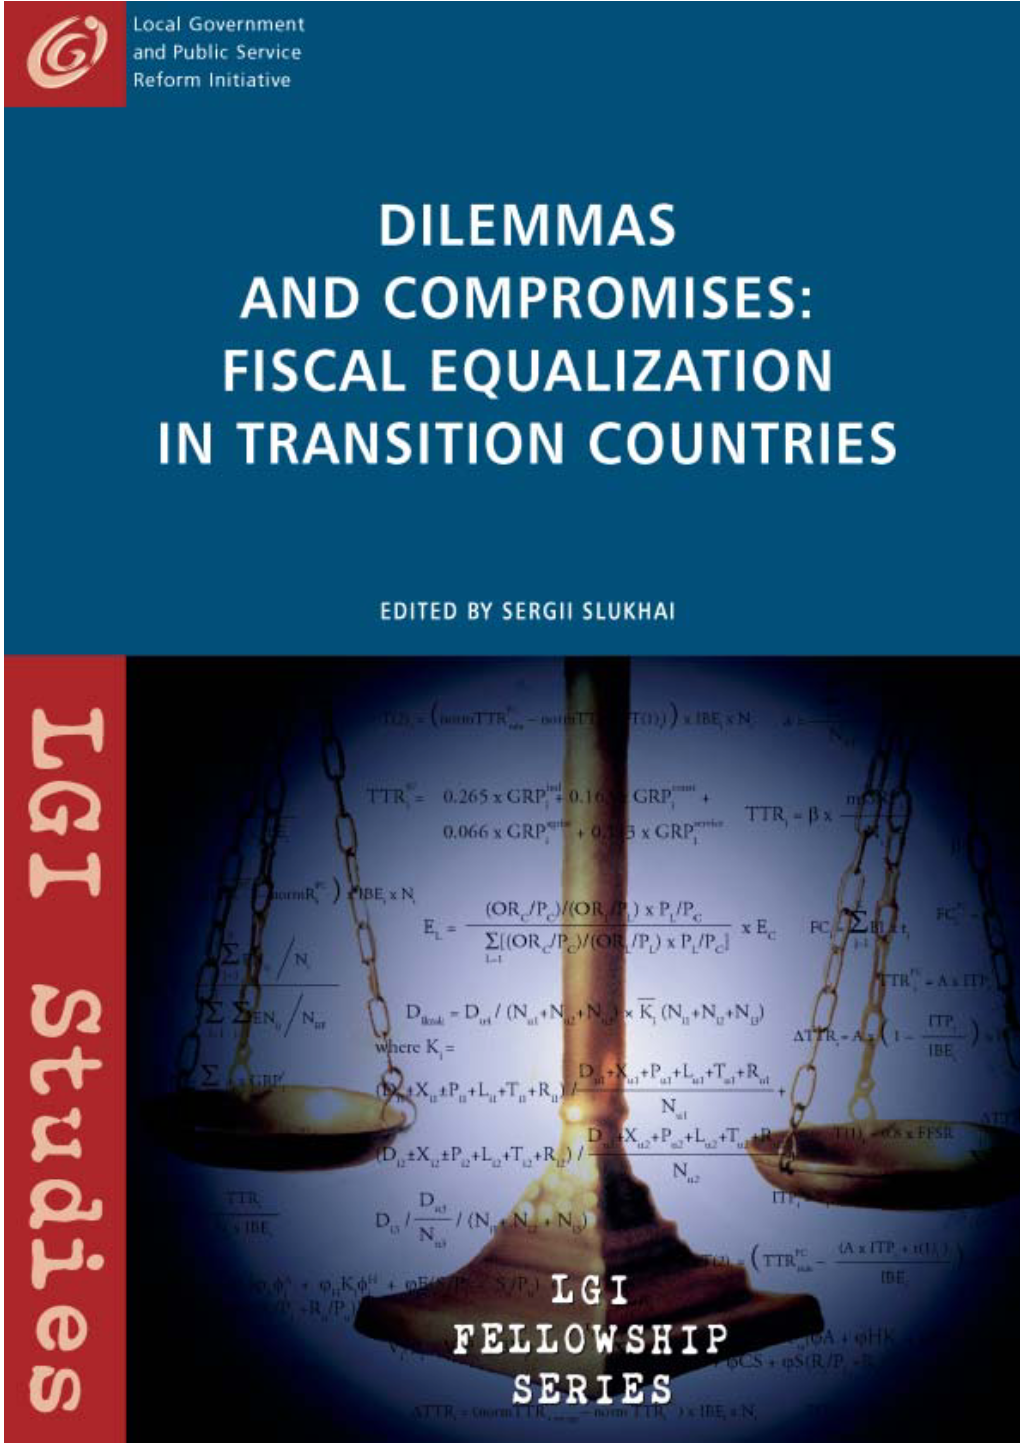 Dilemmas and Compromises: Fiscal Equalization in Transition Countries